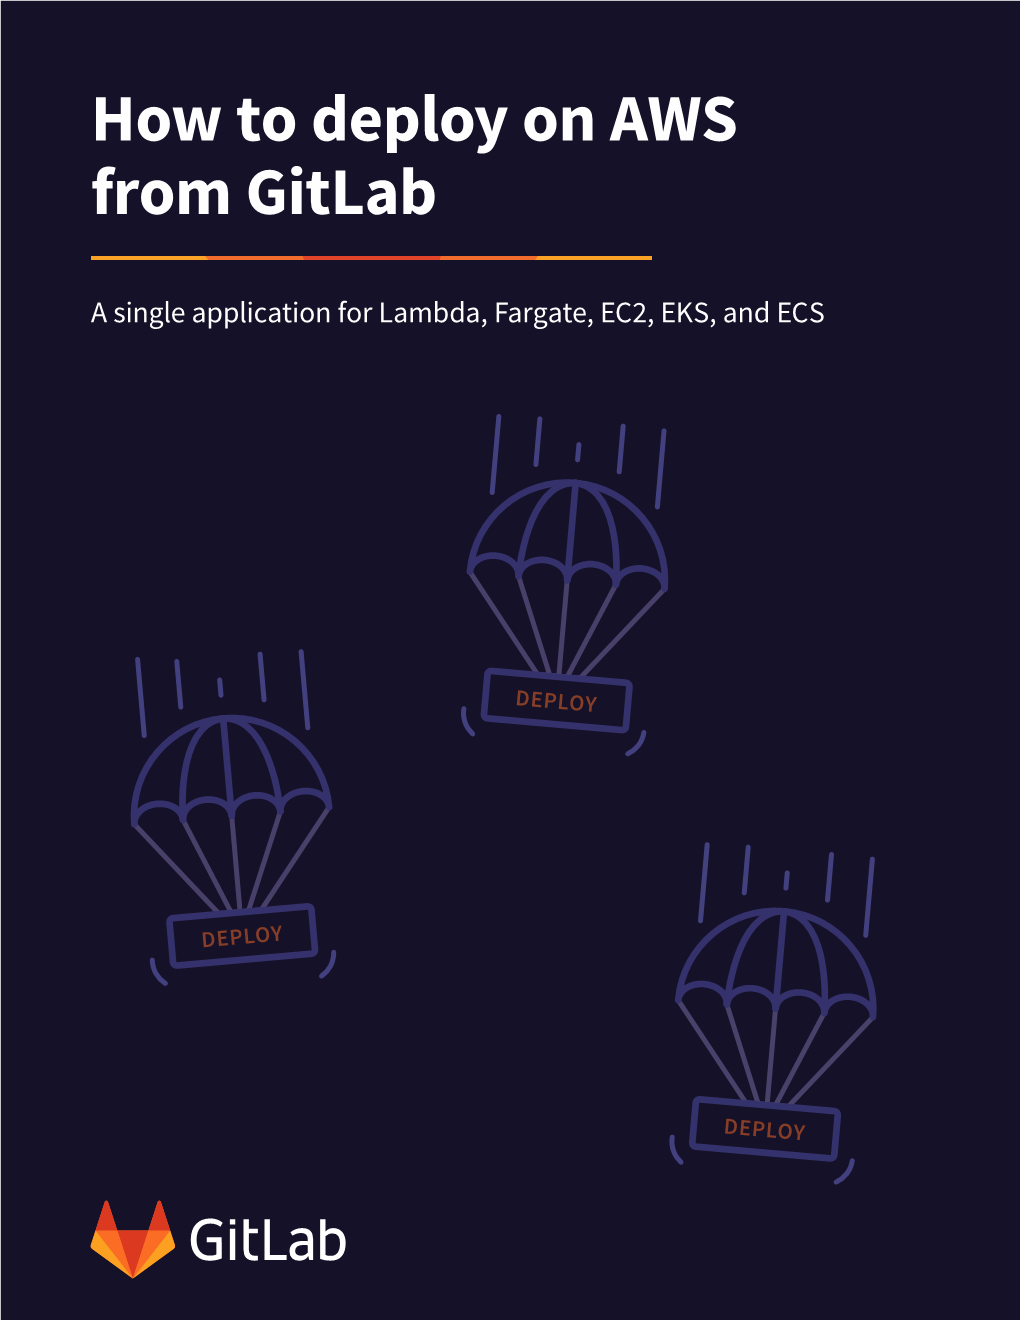 How to Deploy on AWS from Gitlab